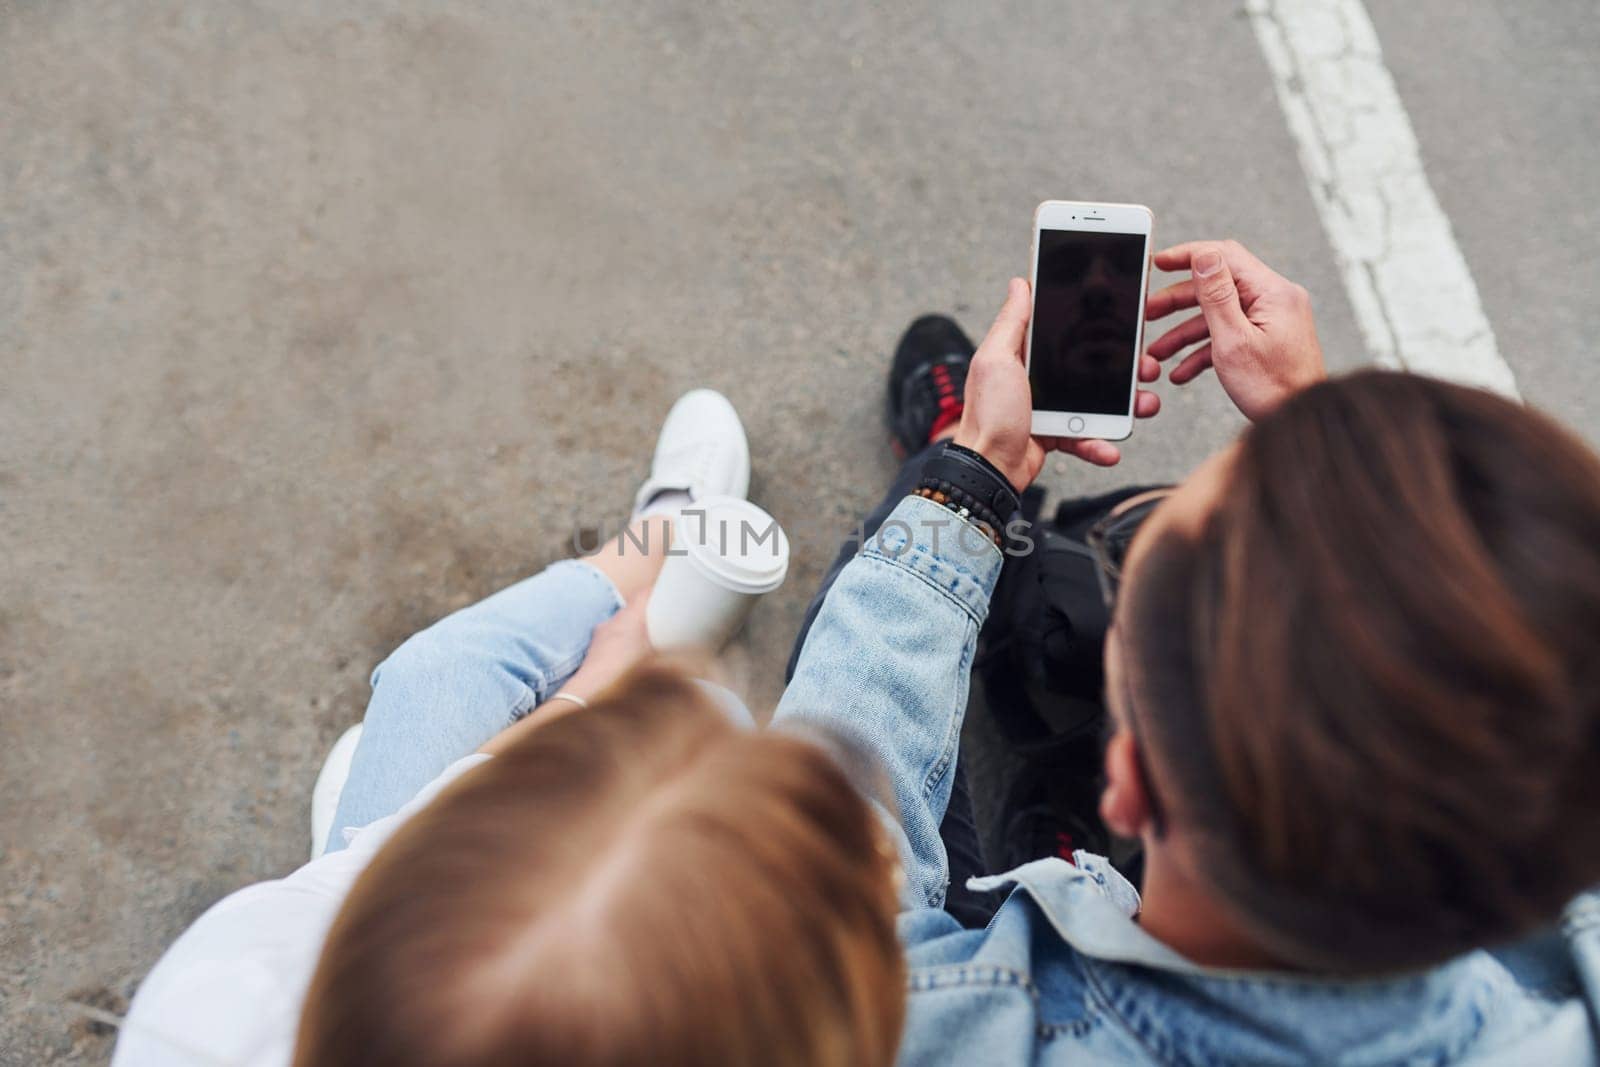 Using phone. Young stylish man with woman in casual clothes sitting outdoors together. Conception of friendship or relationships.